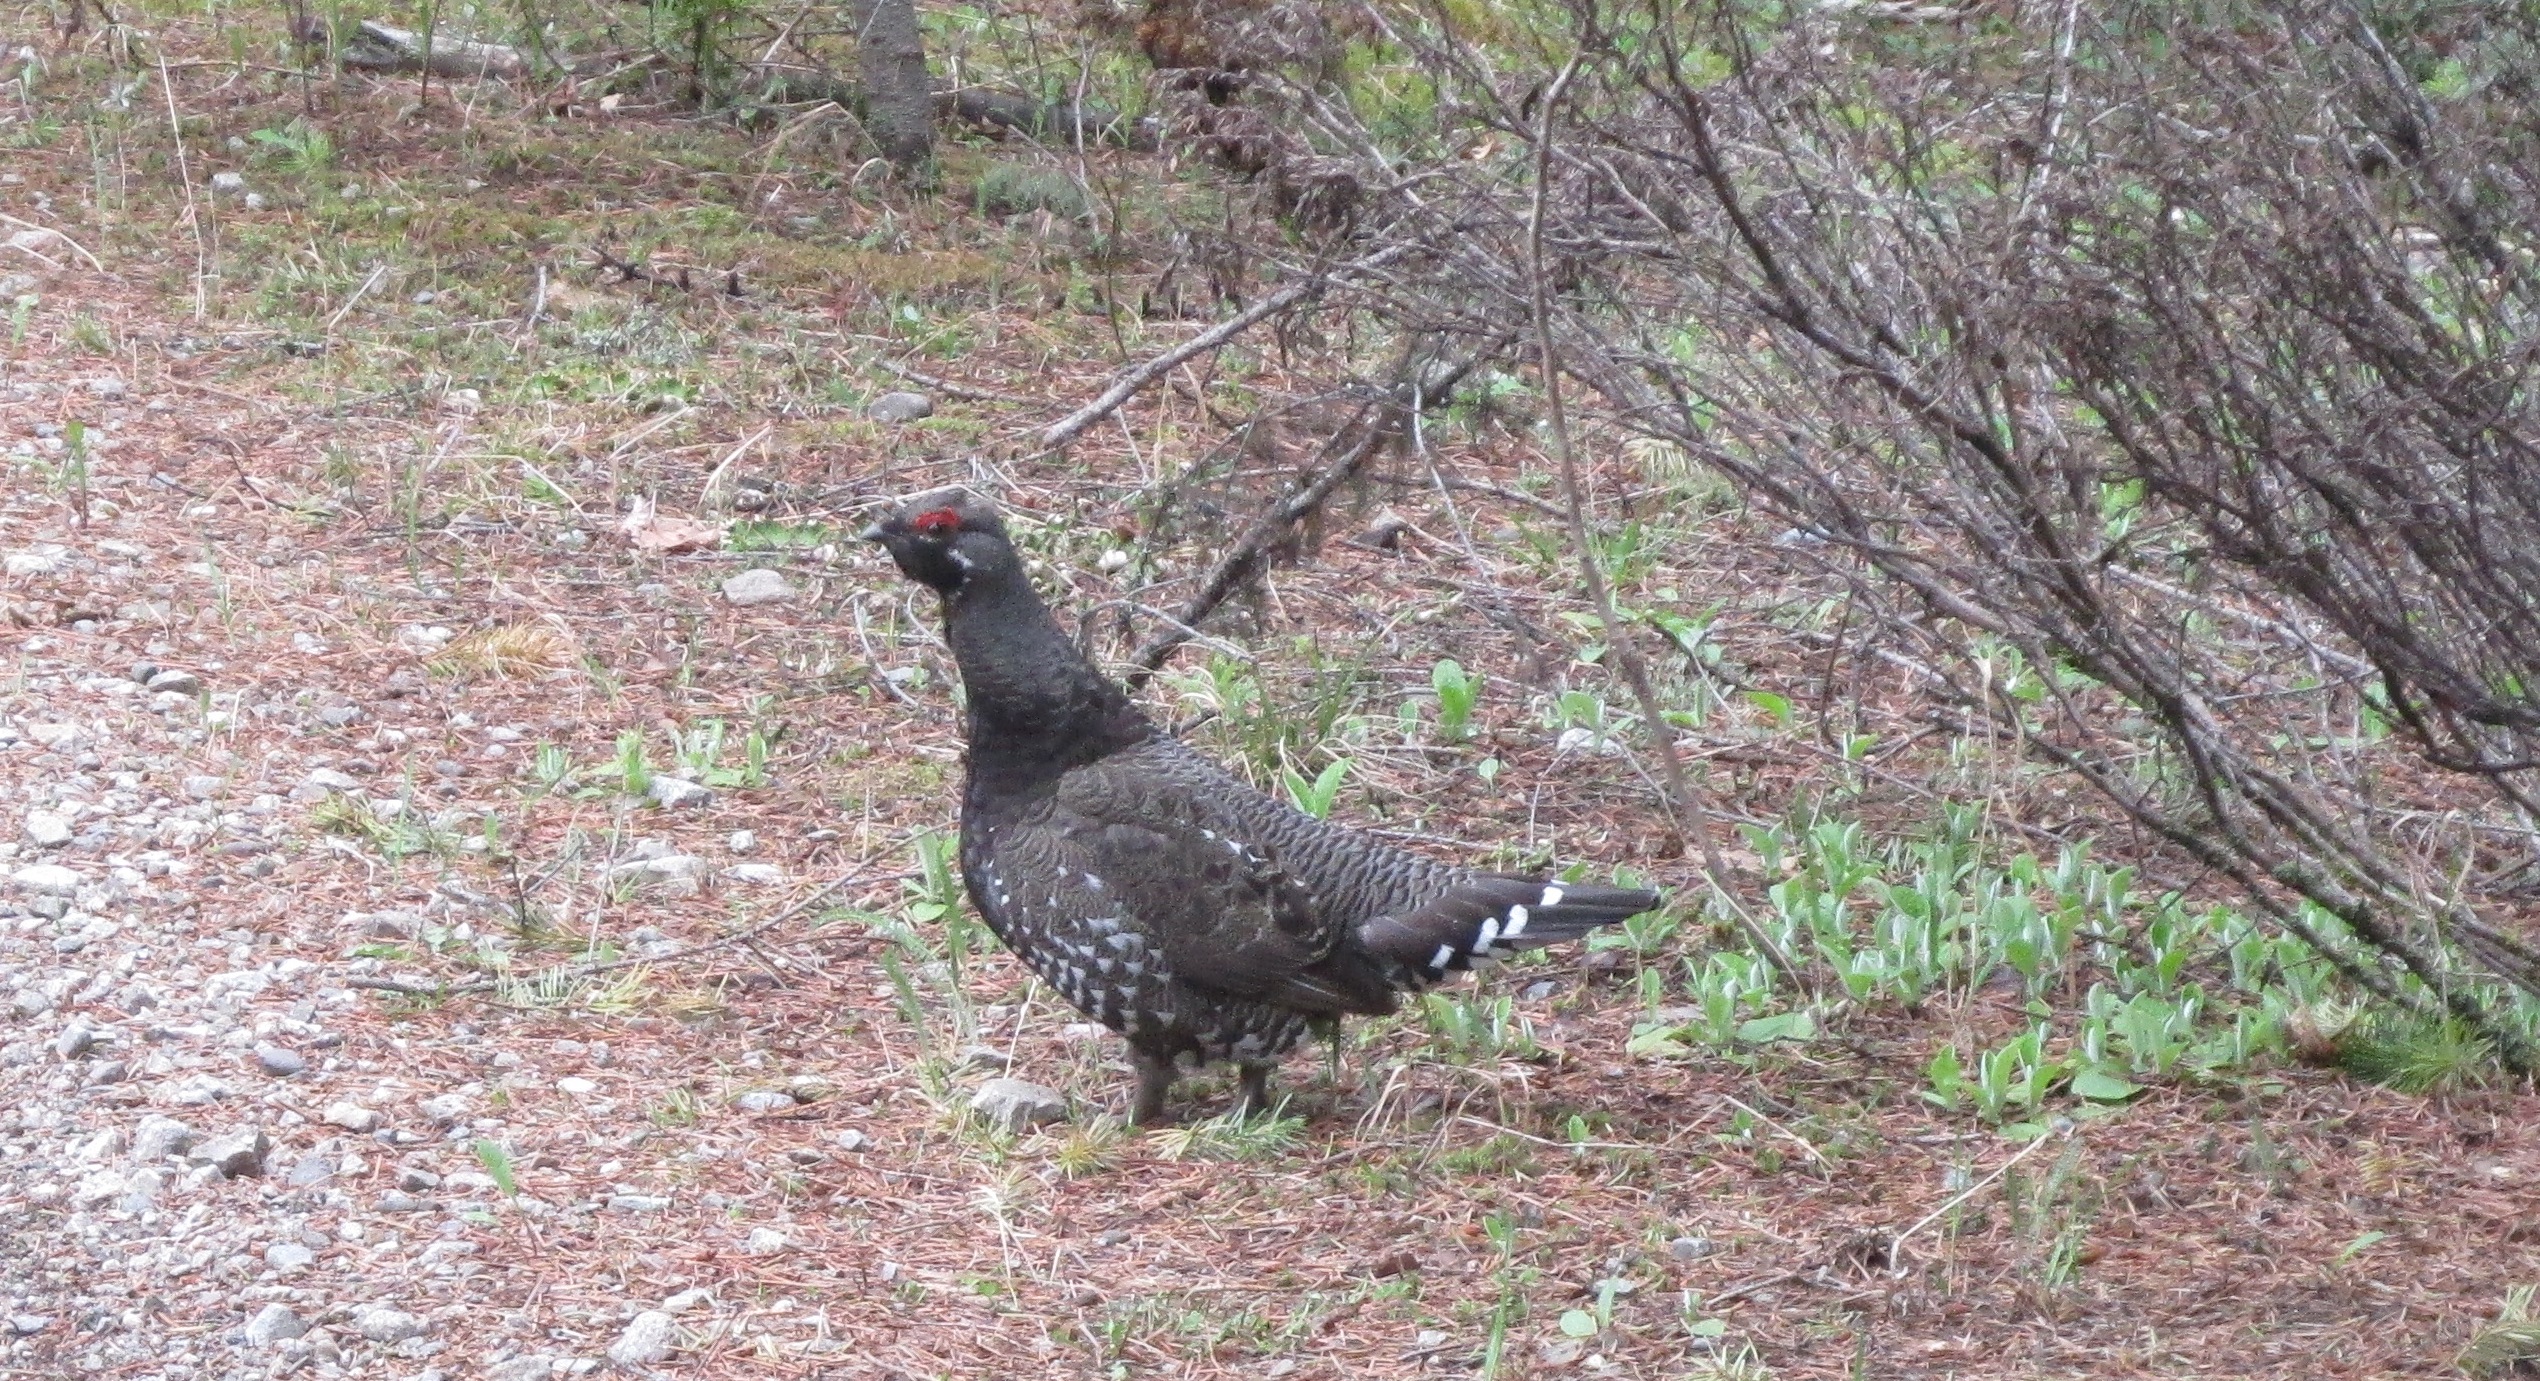 Grouse on the KVR. Photo by Elliott Skierszkan.